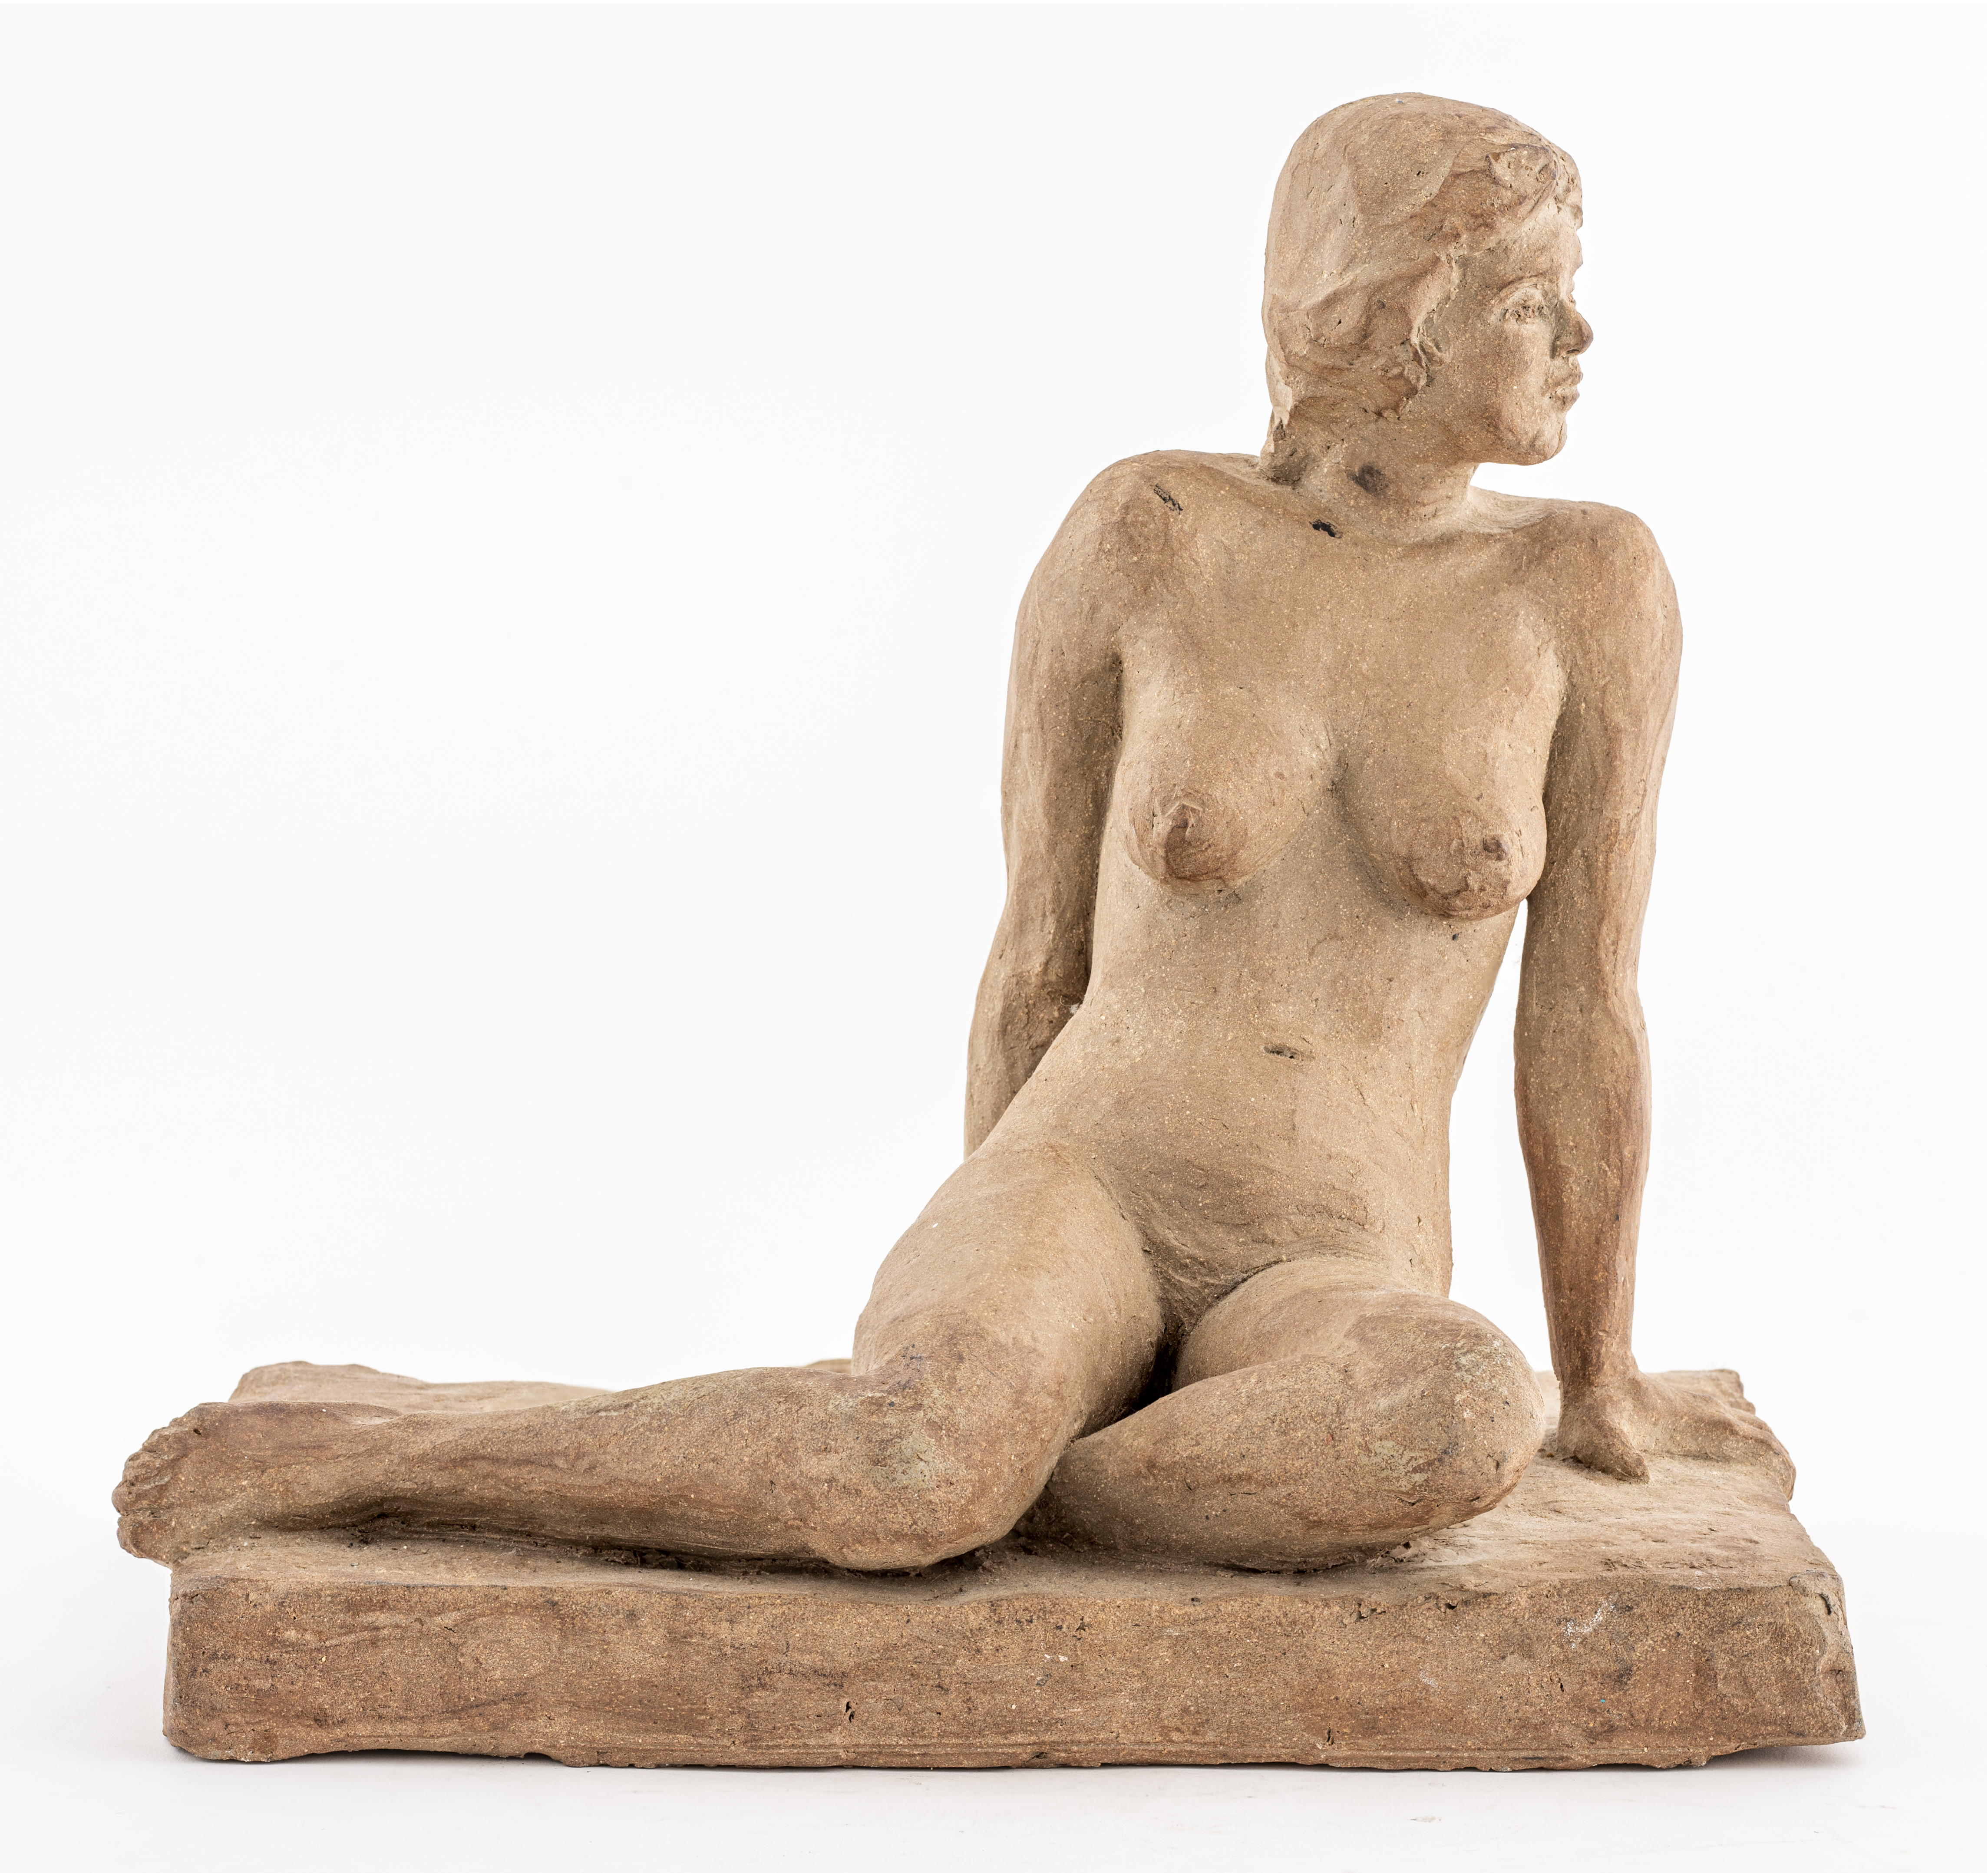 CLAY SCULPTURE OF A SEATED NUDE